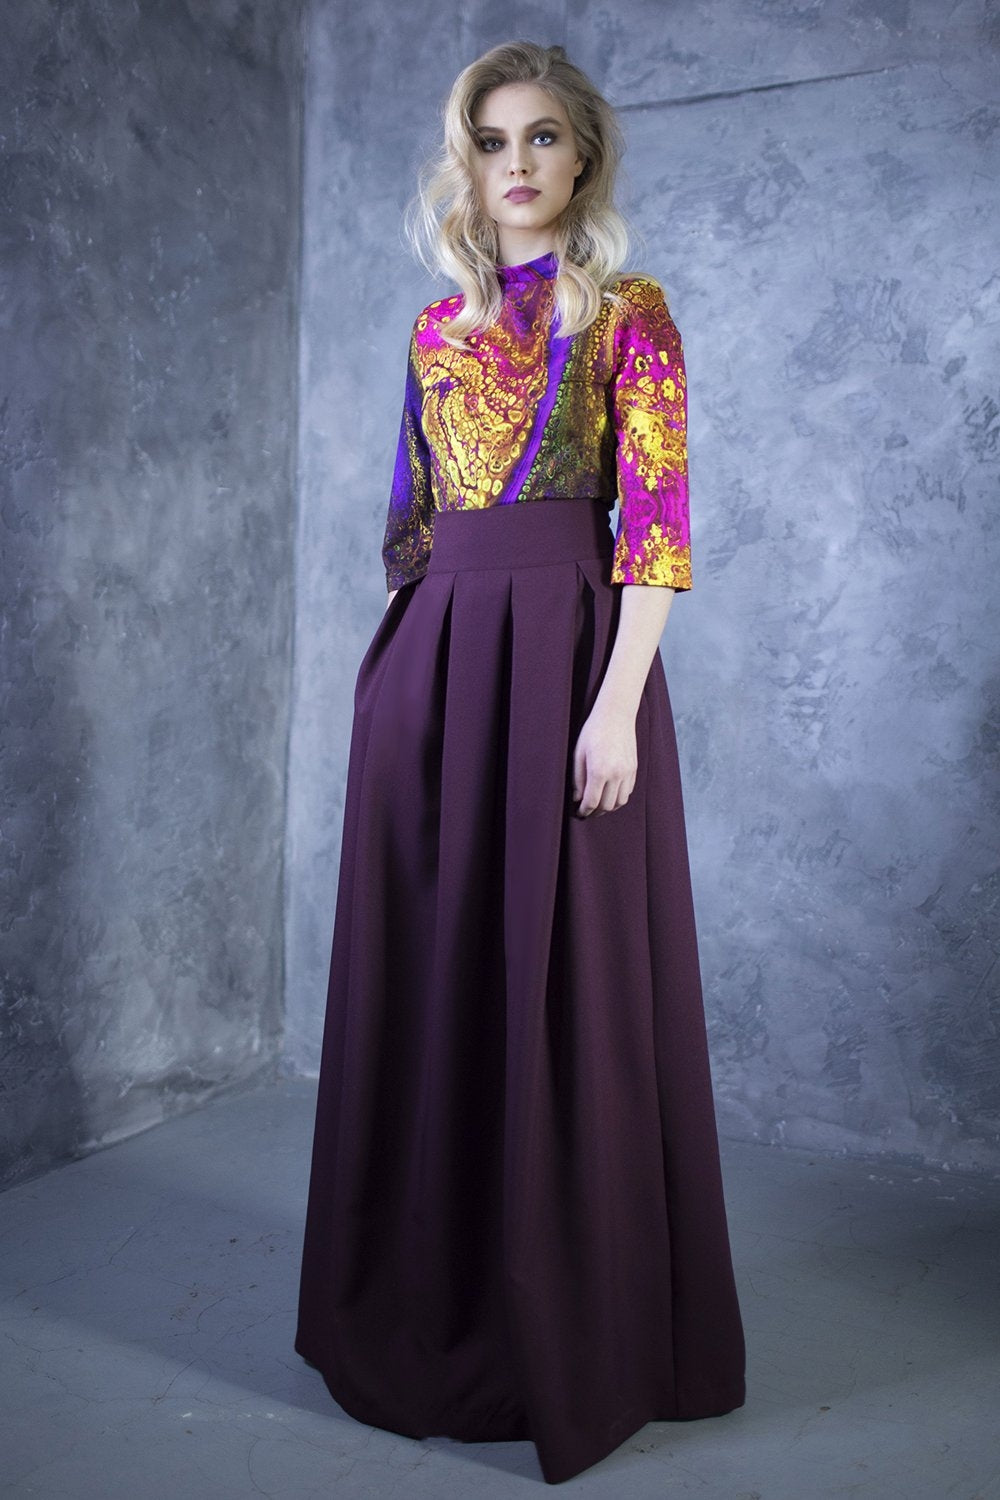 Full maxi grape shade skirts with side pockets